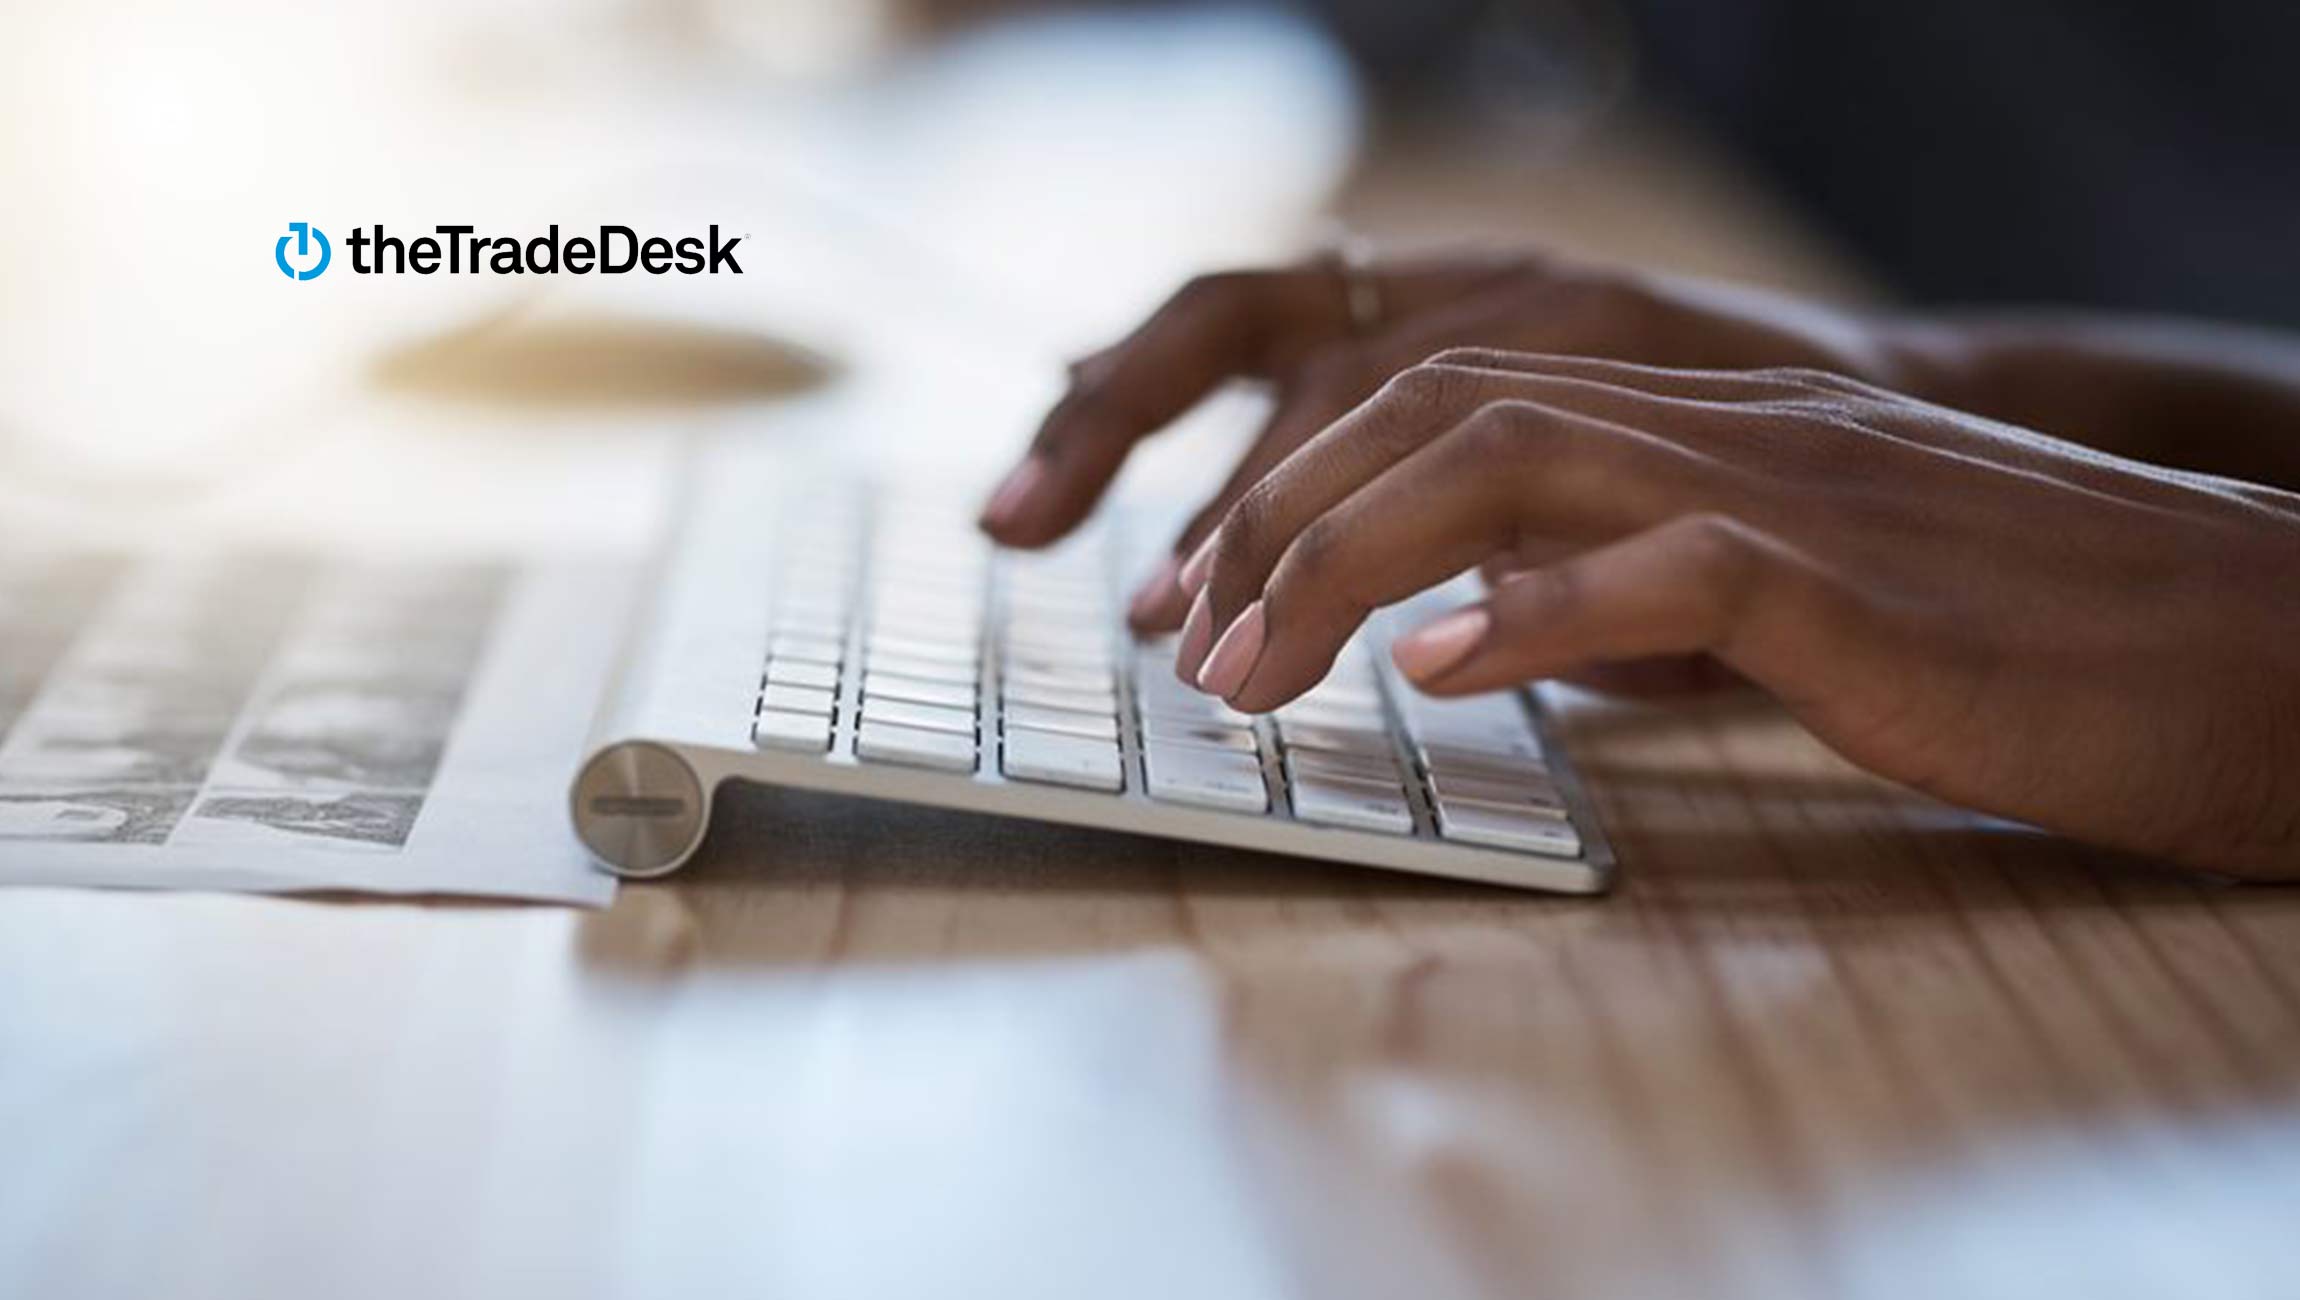 The Trade Desk launches India operations, gives access to ad inventory available across the internet